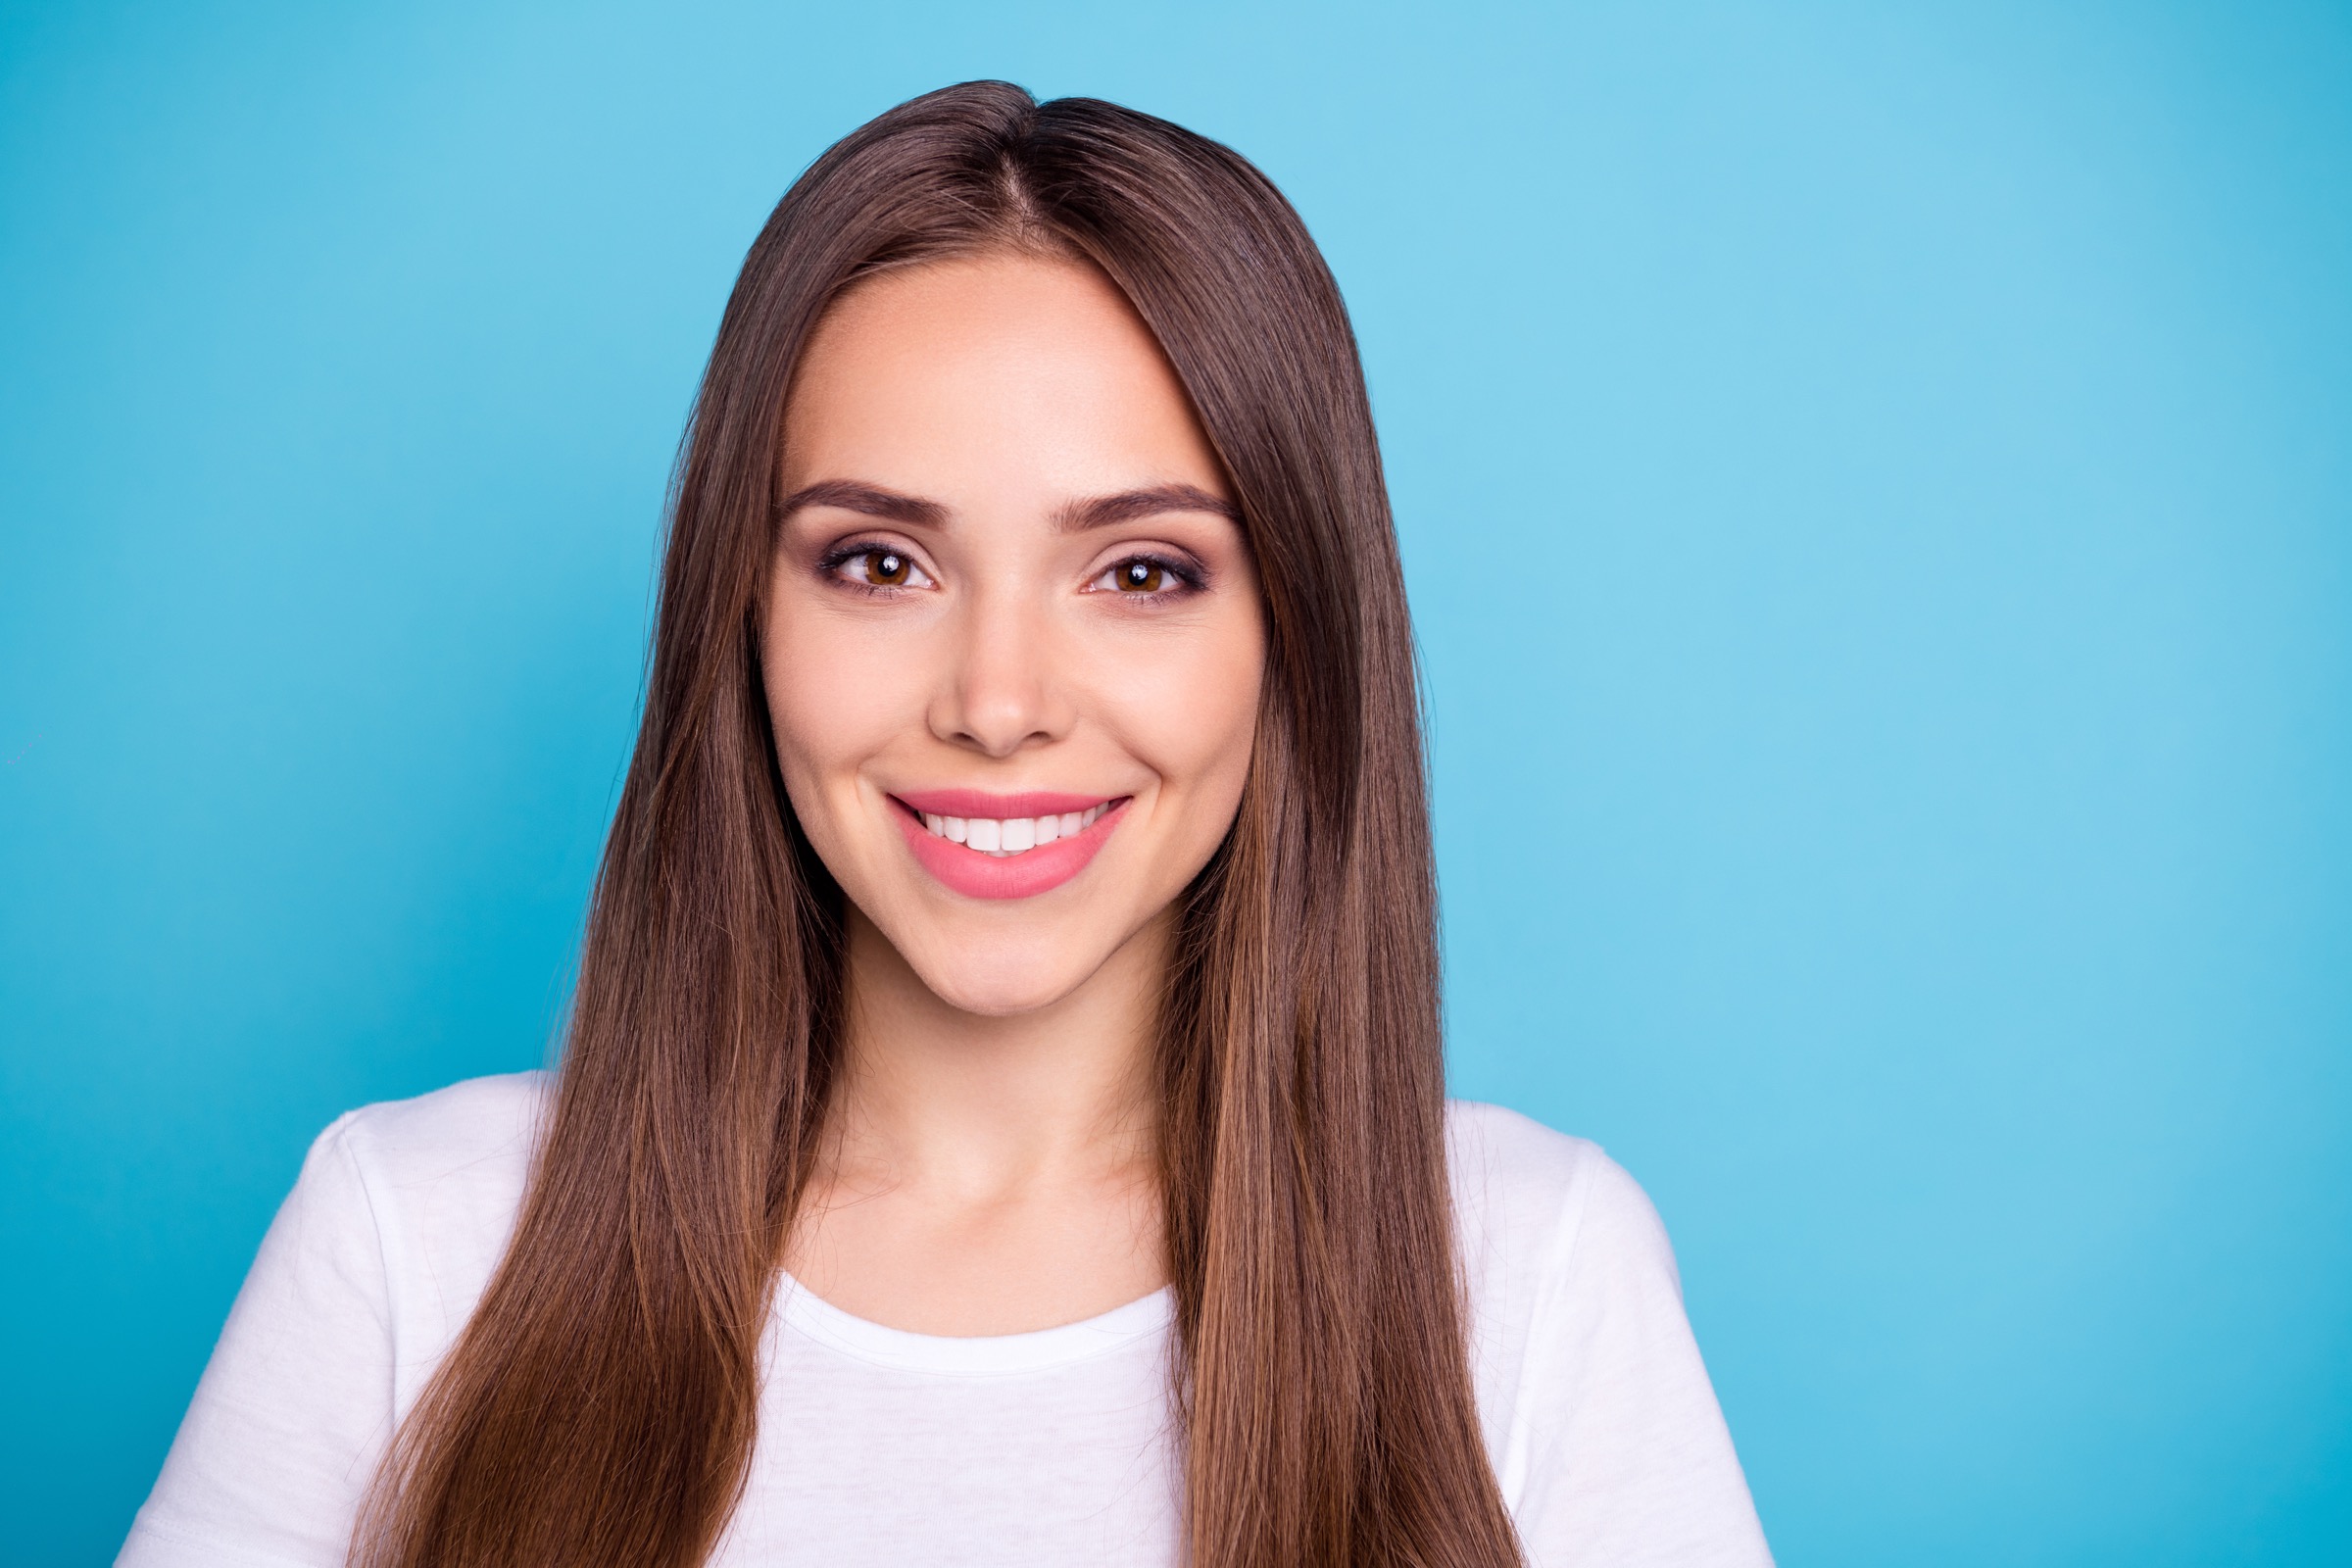 Woman smiling while in front of a blue background